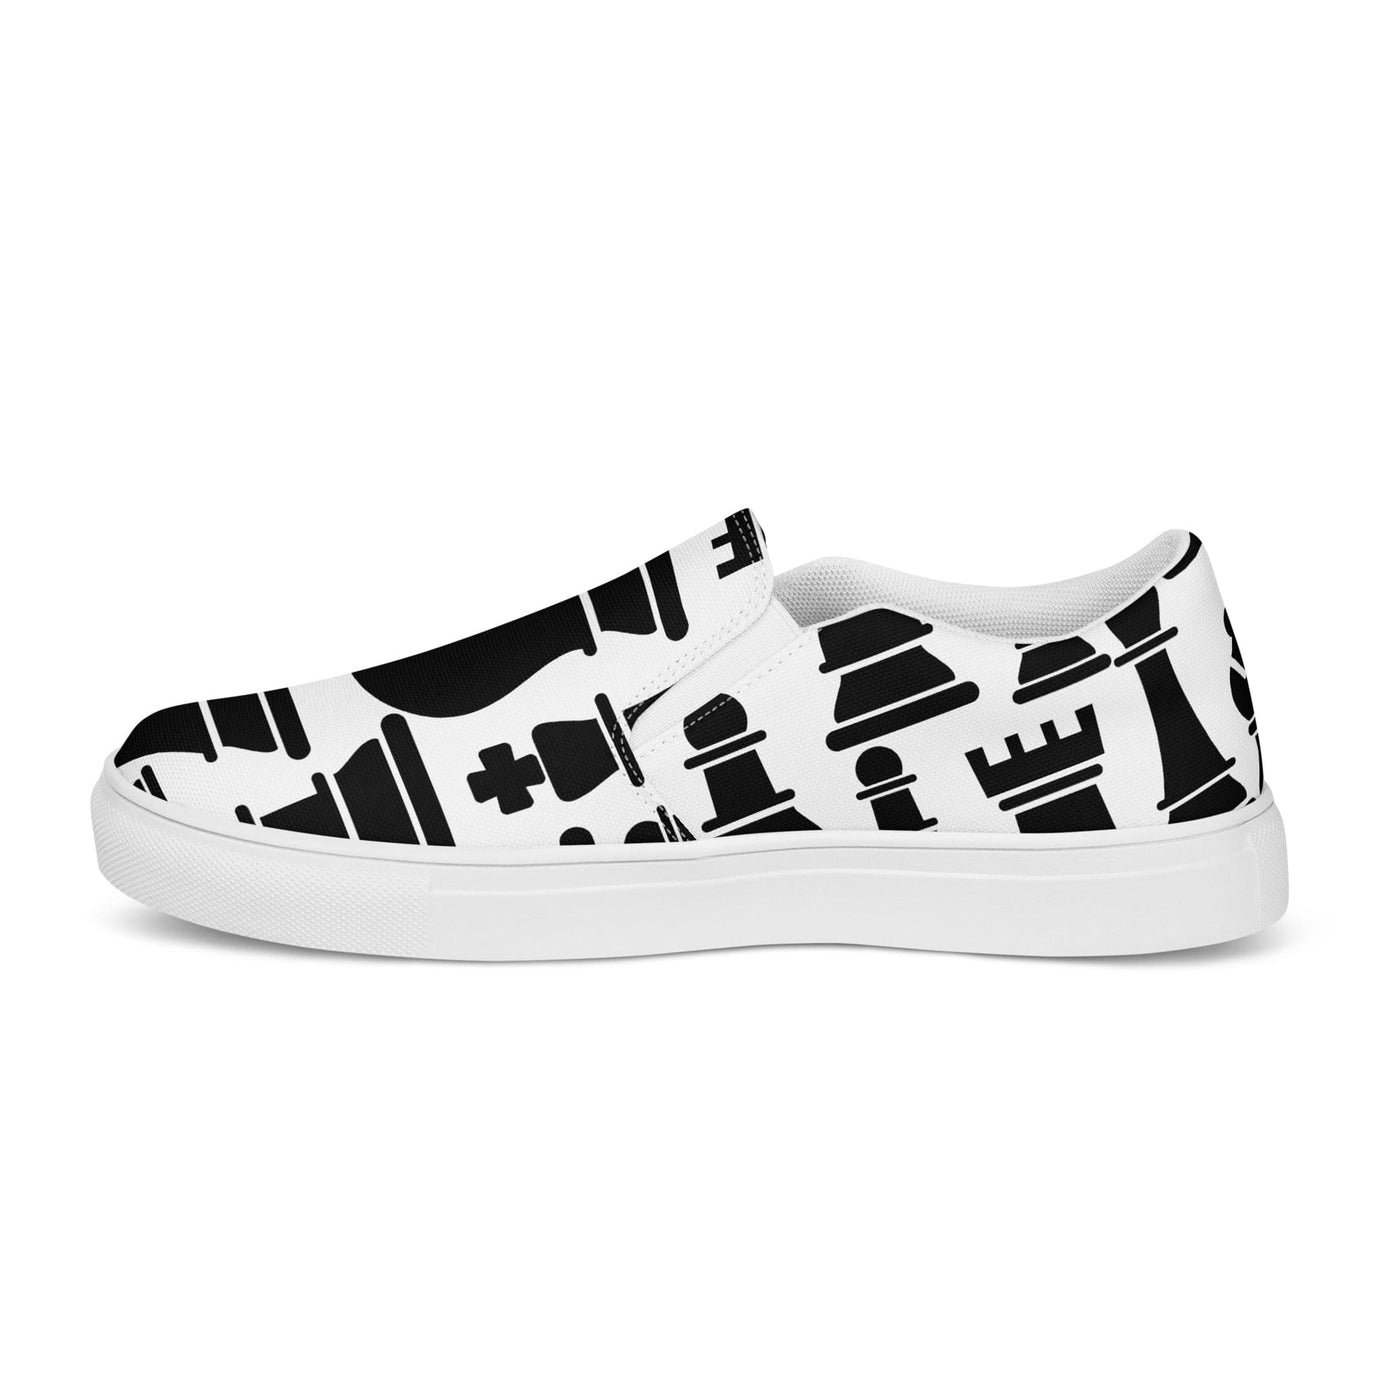 Men’s Slip-on Canvas Shoes Black And White Chess Print - Mens | Sneakers